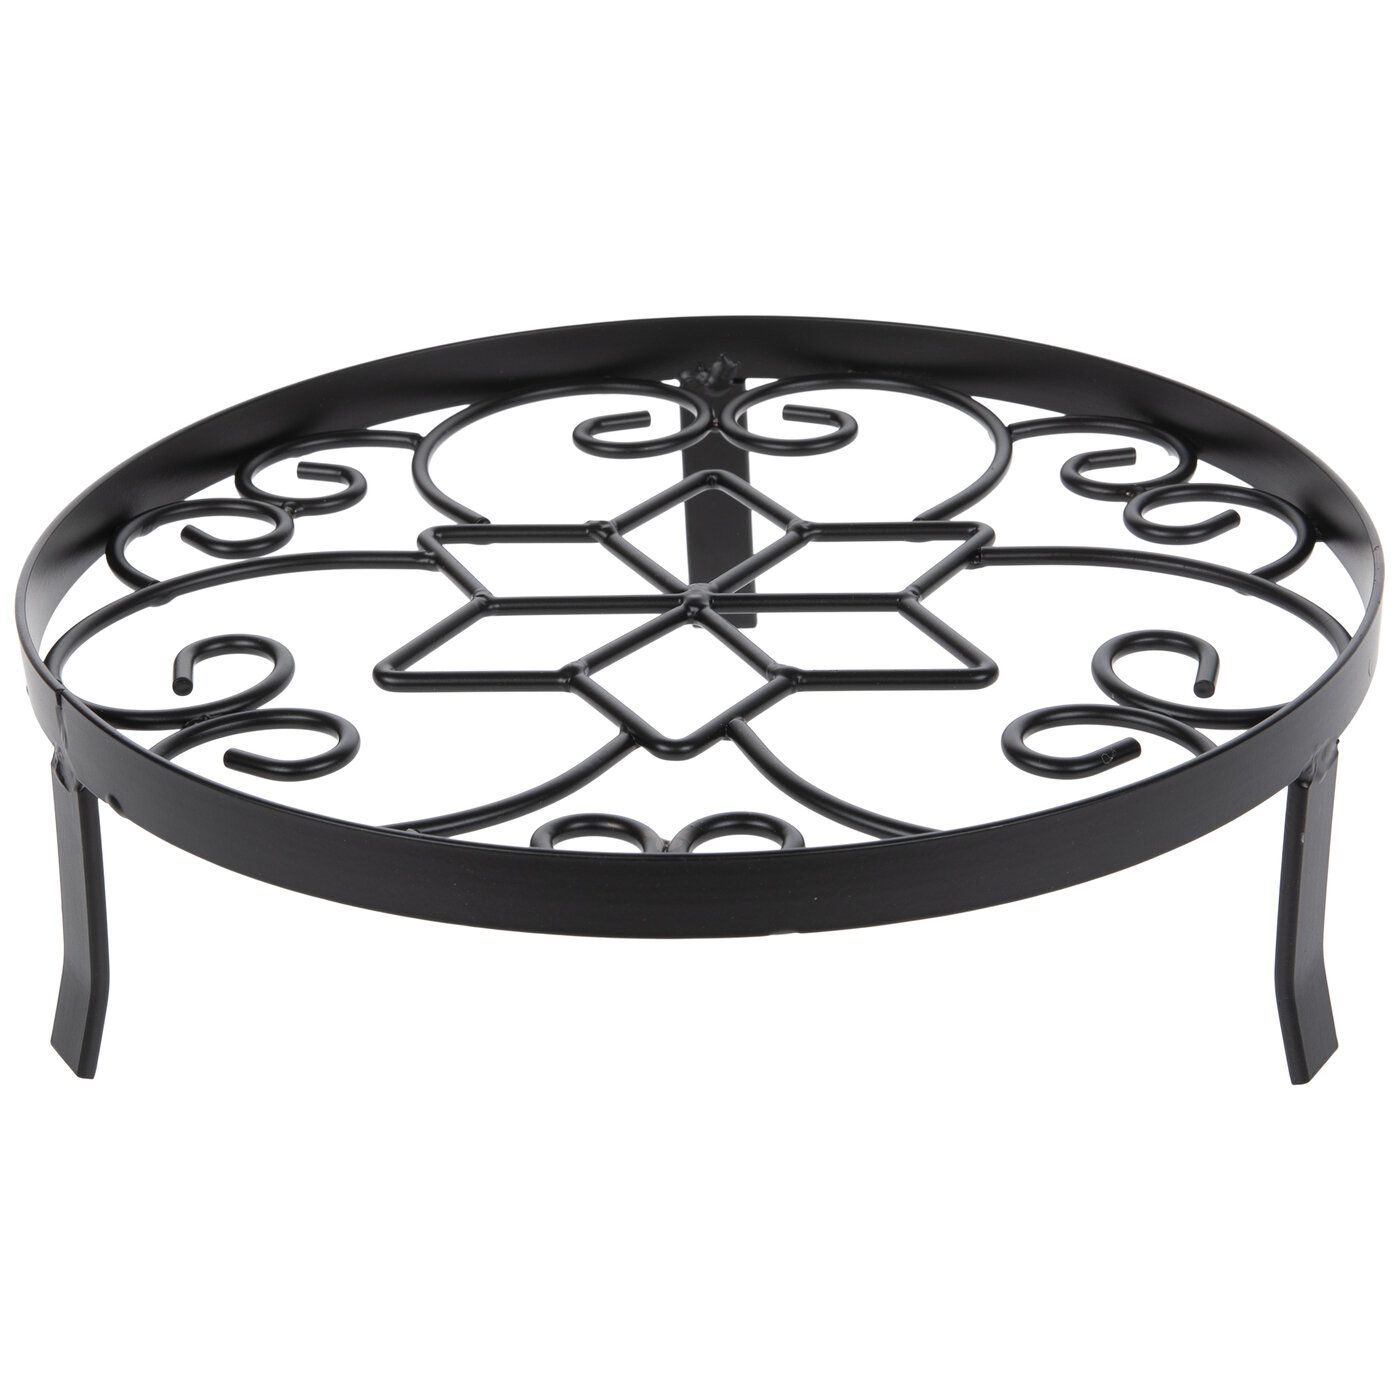 Black Star & Heart Metal Plant Stand | Hobby Lobby | 5485982 Throughout Metal Plant Stands (View 13 of 15)